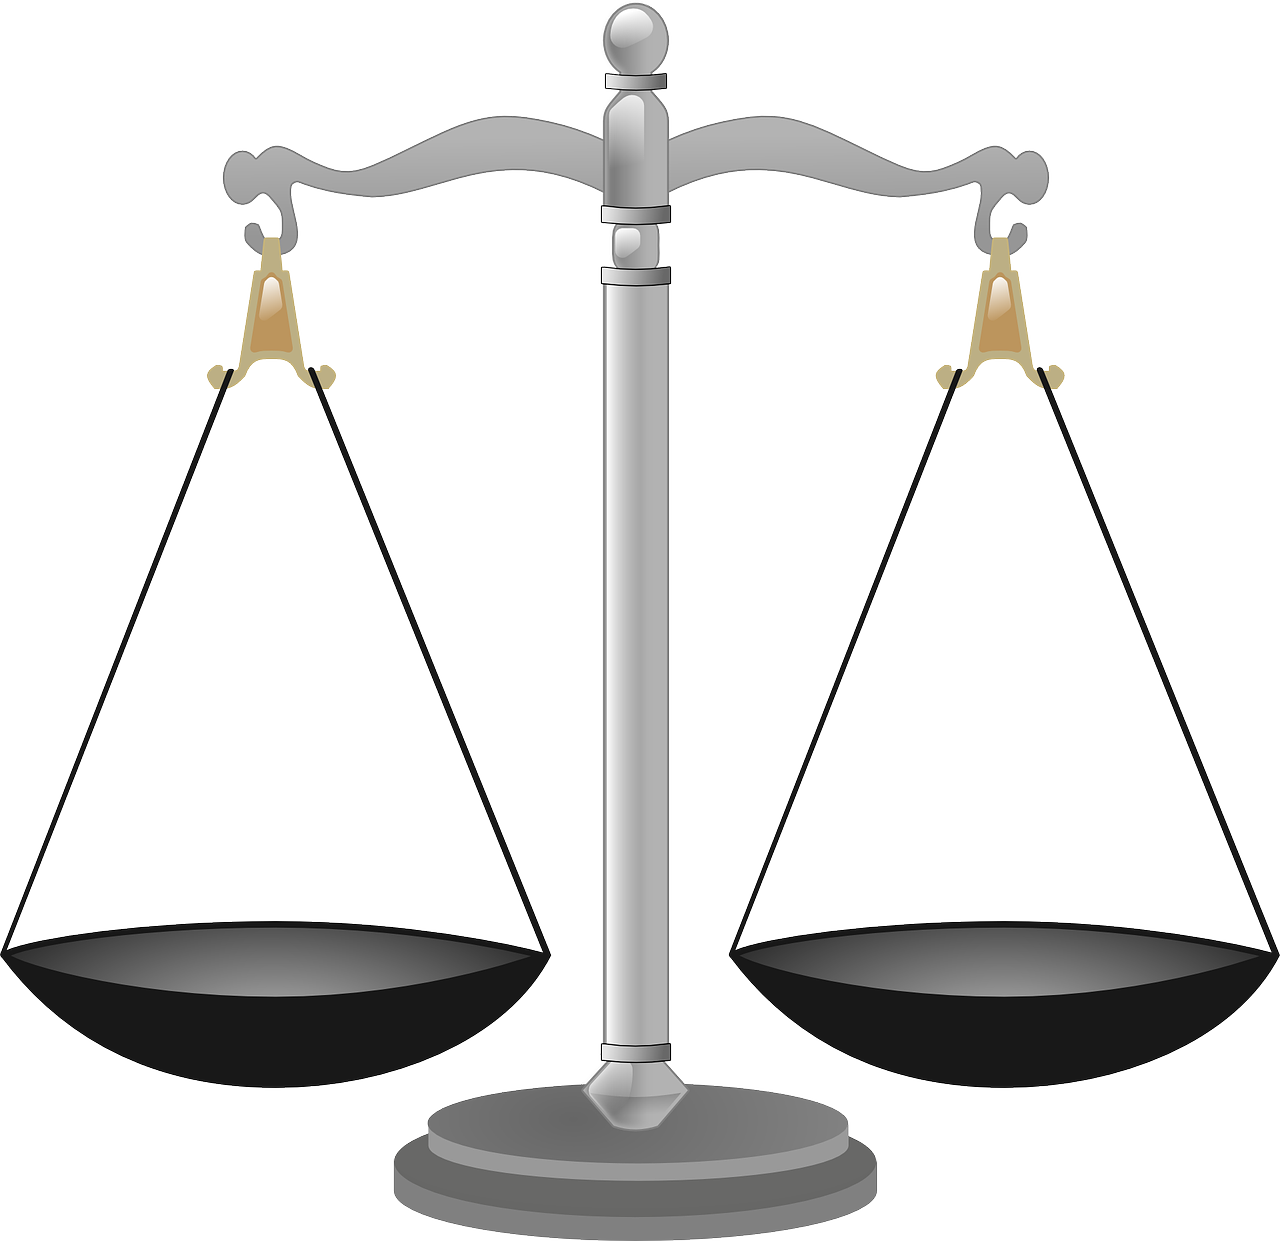 scales, justice, scale-147219.jpg